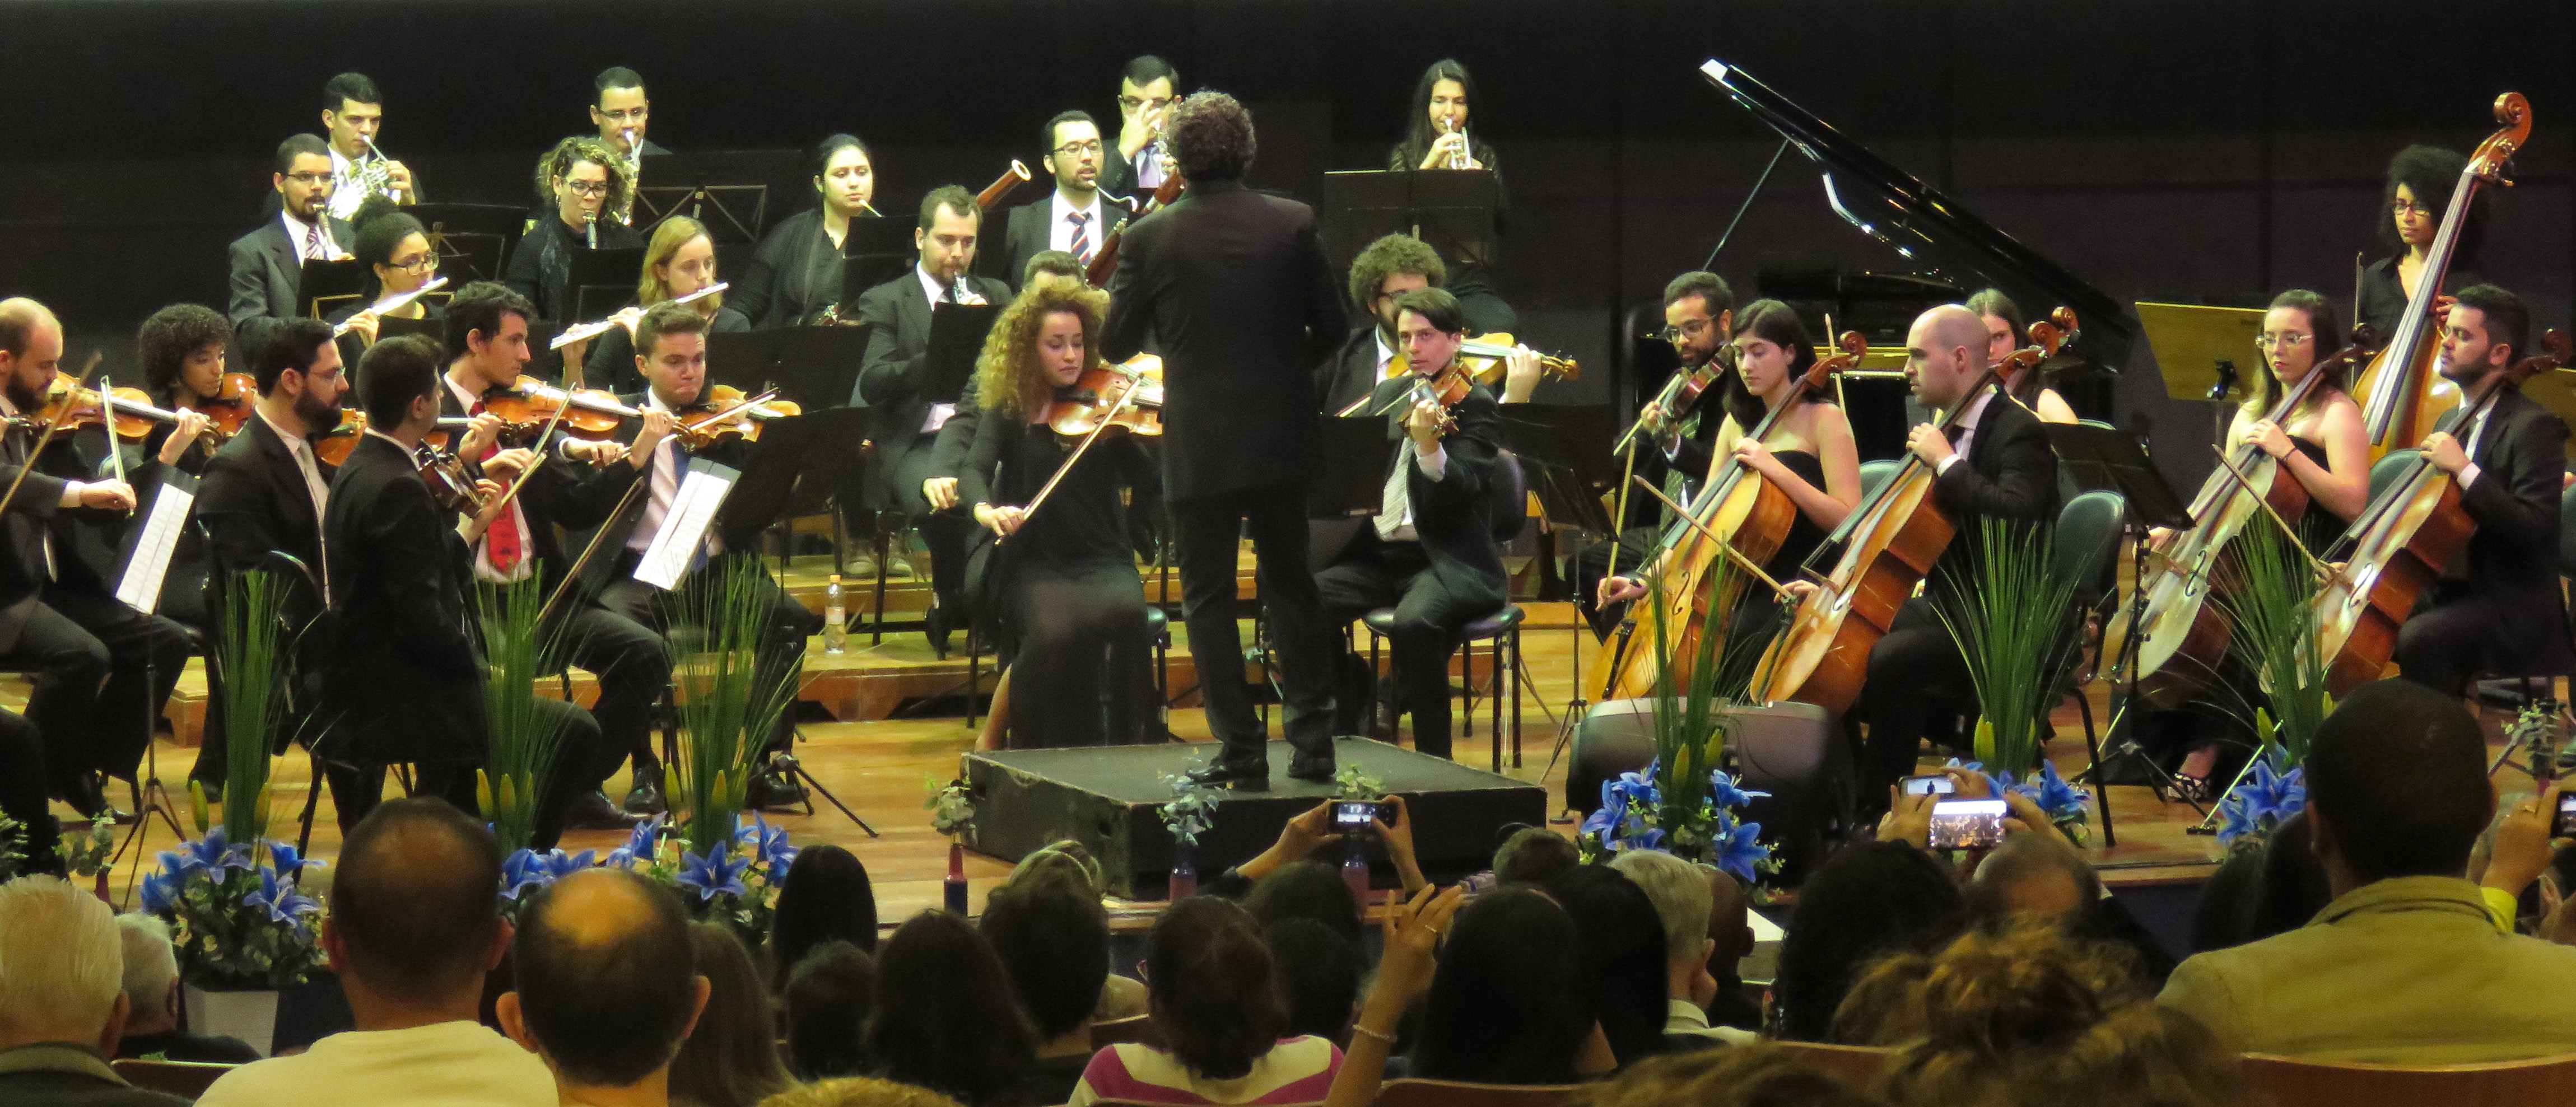 Performance by the ECA chamber orchestra